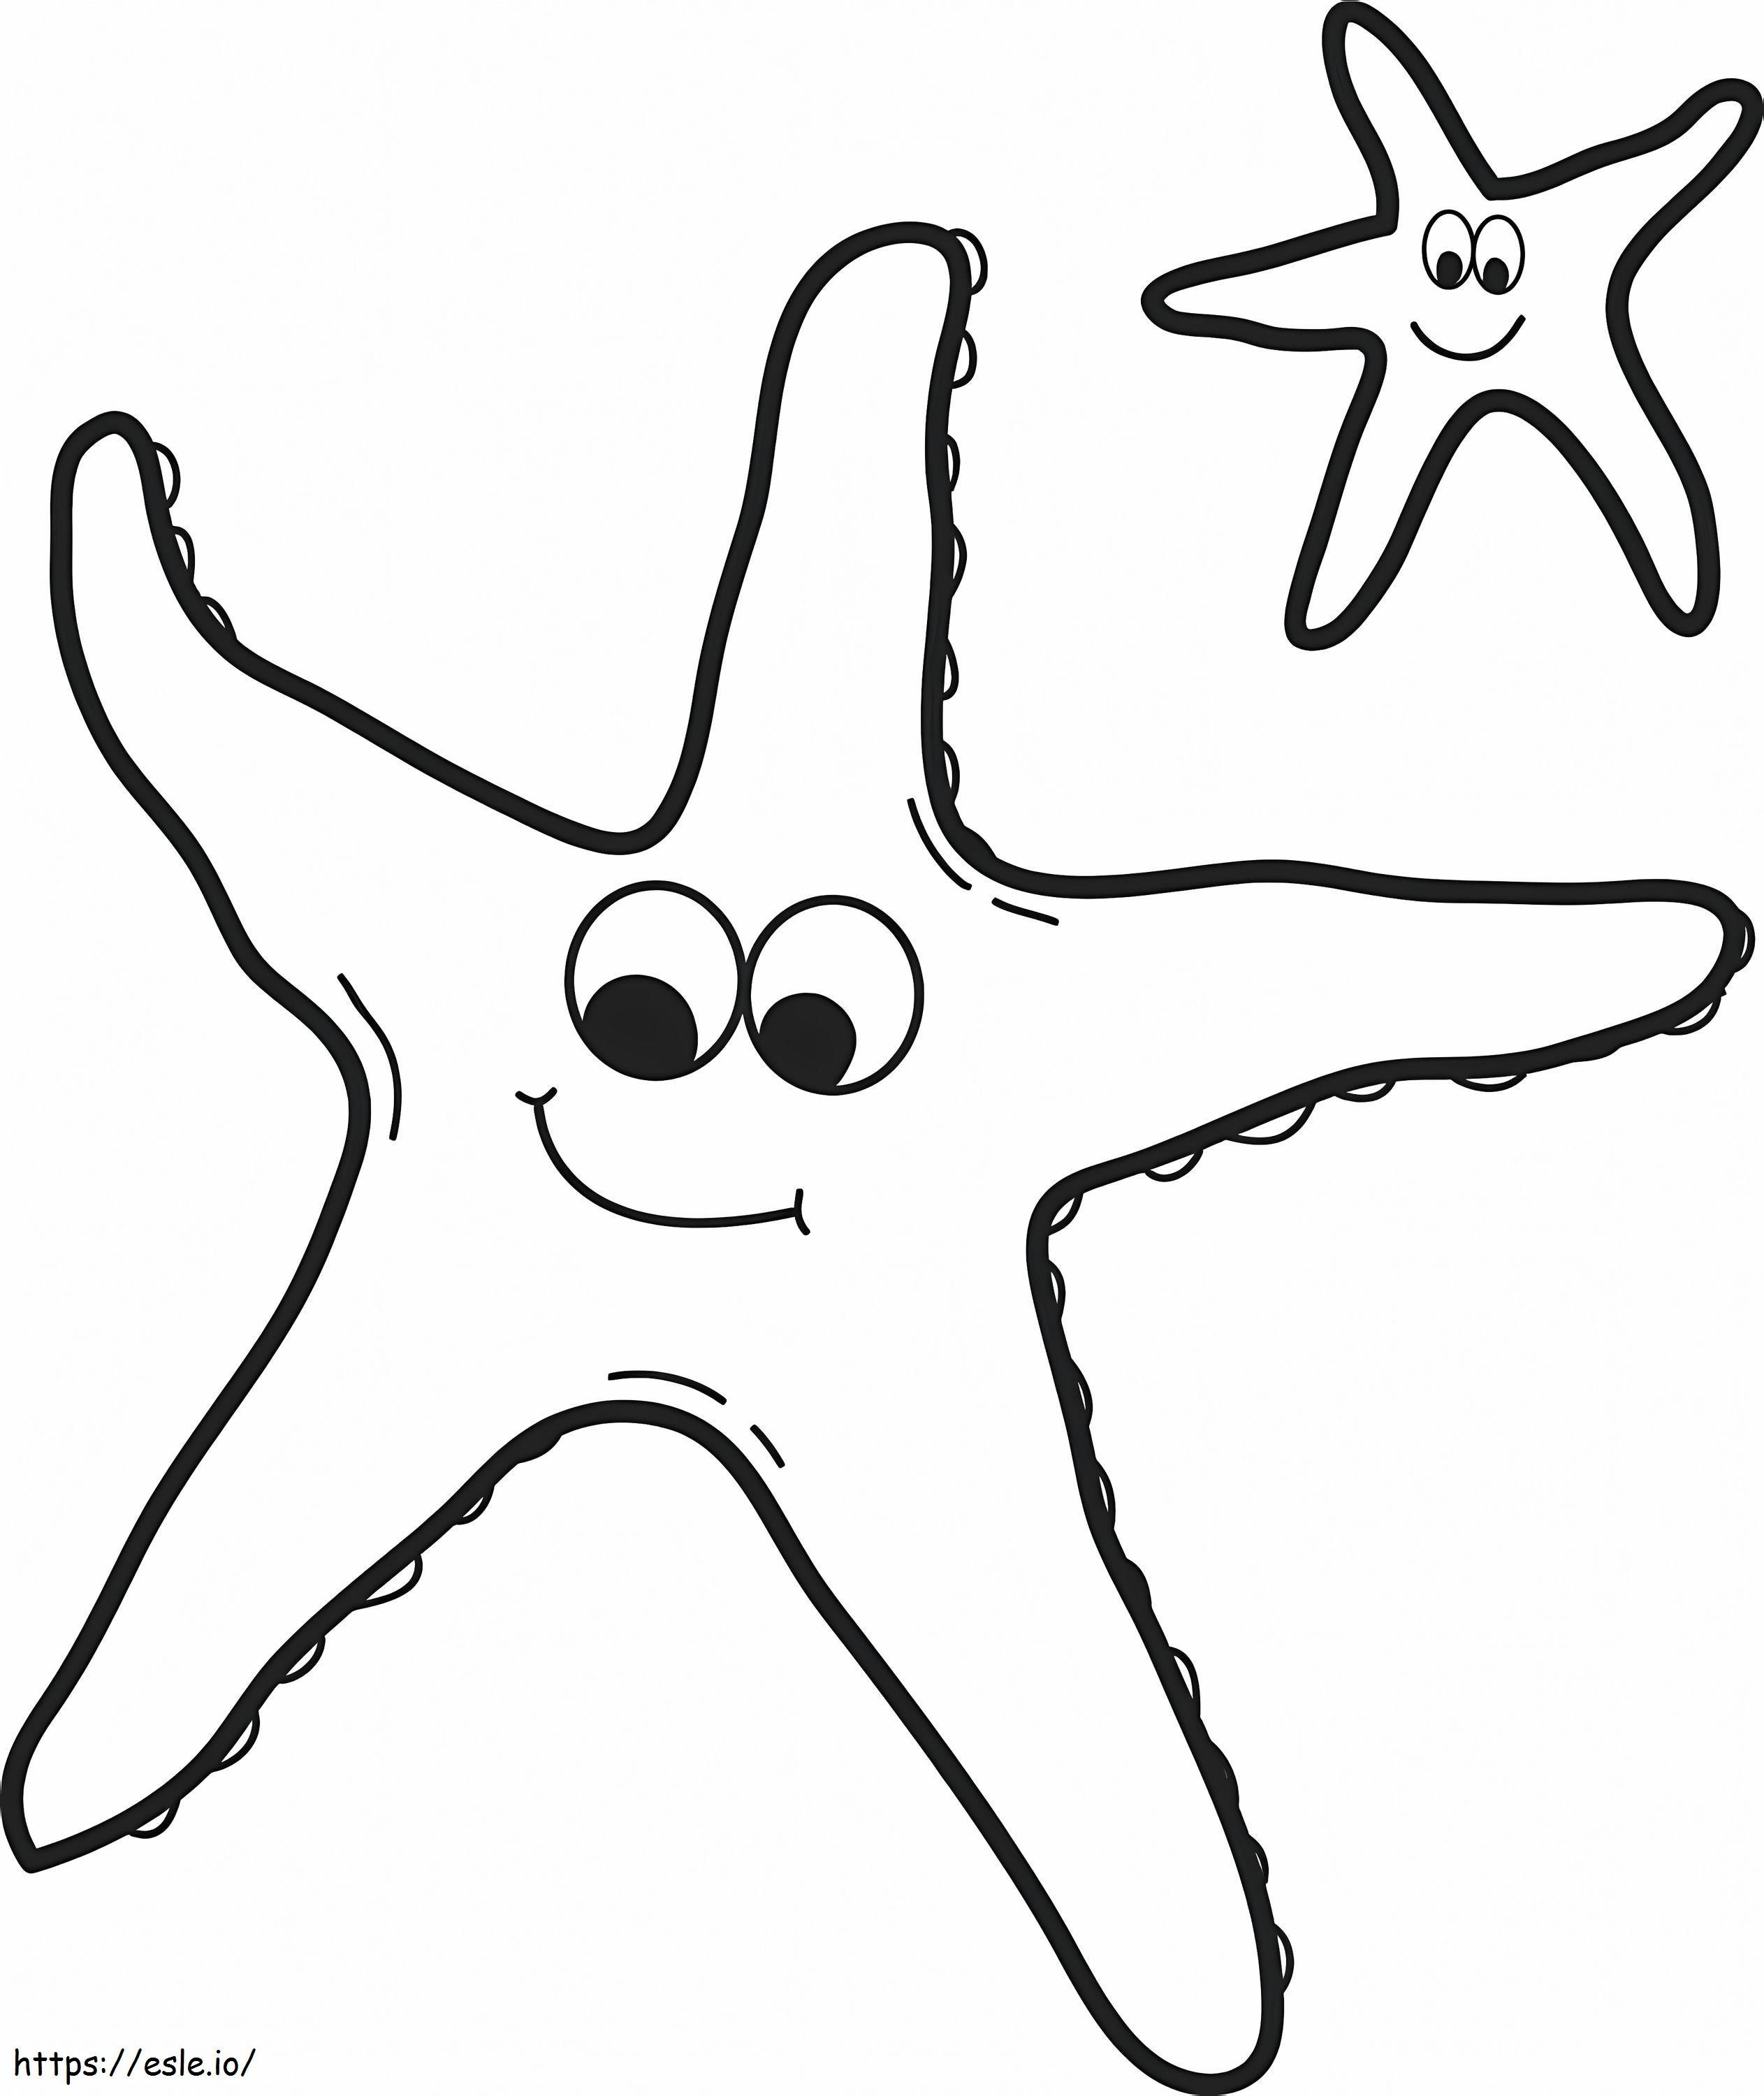 Two Starfish Smiling coloring page